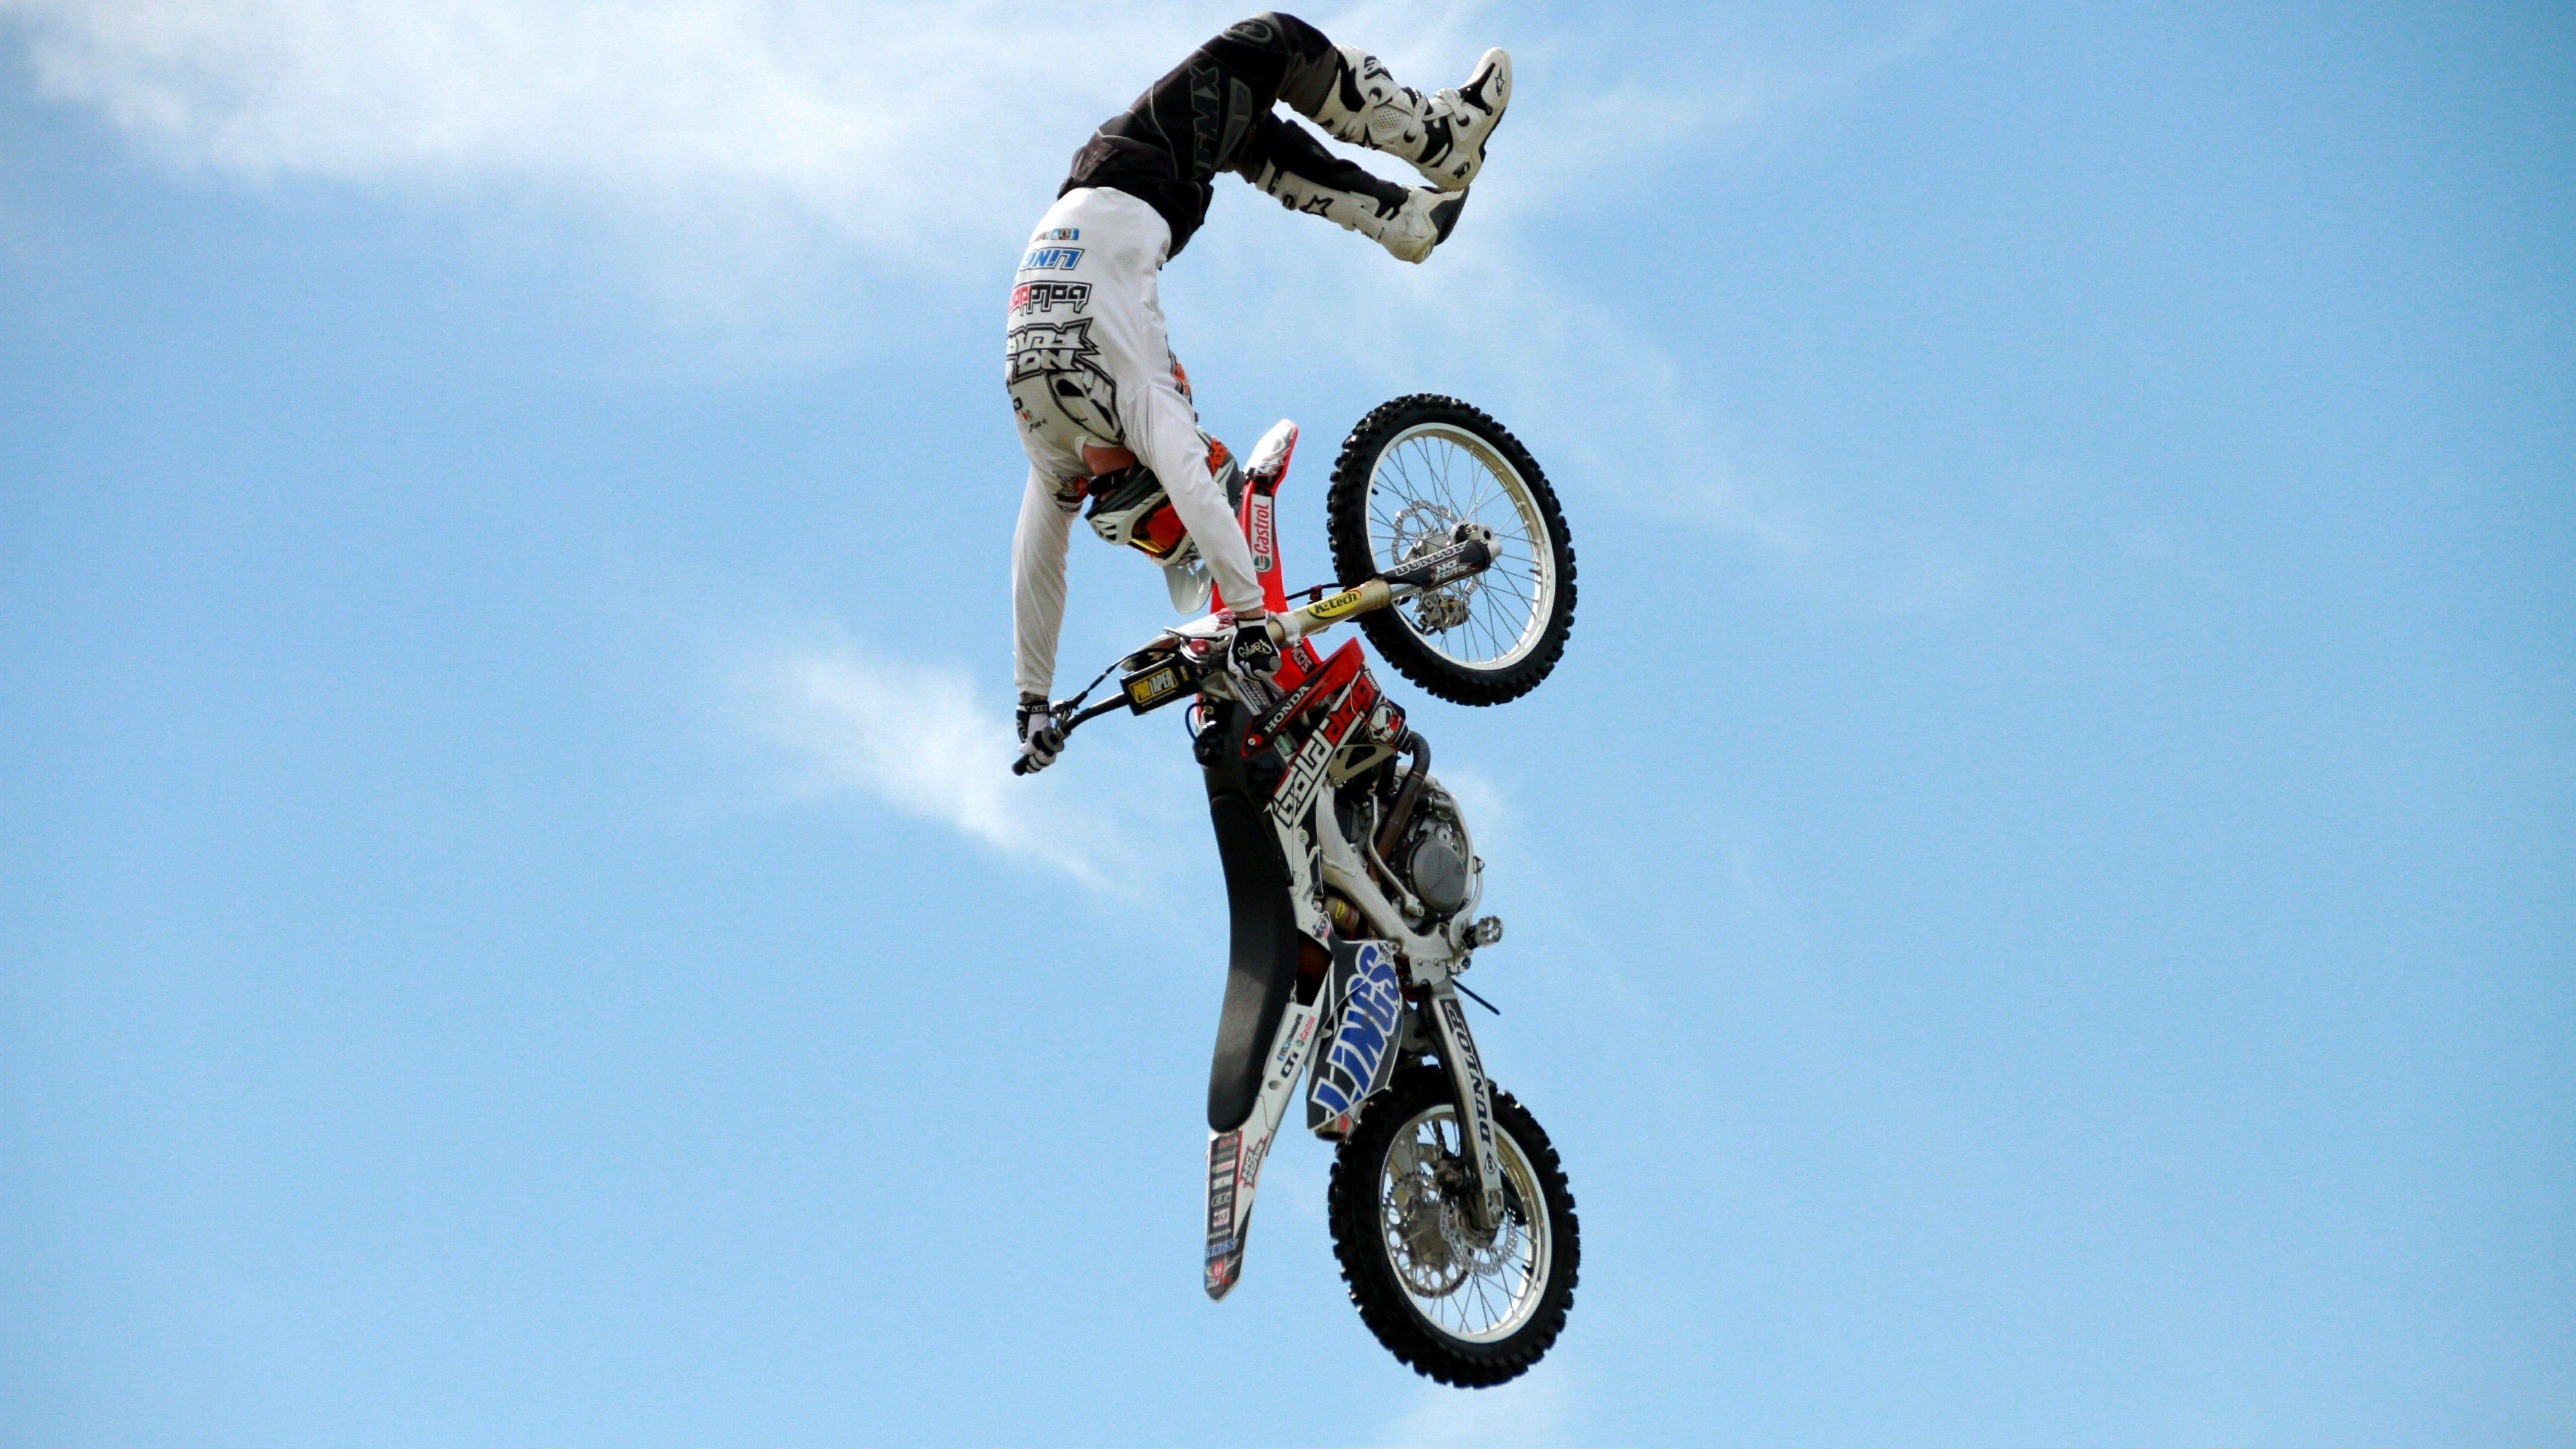 Motocross HD Wallpaper and Background Image